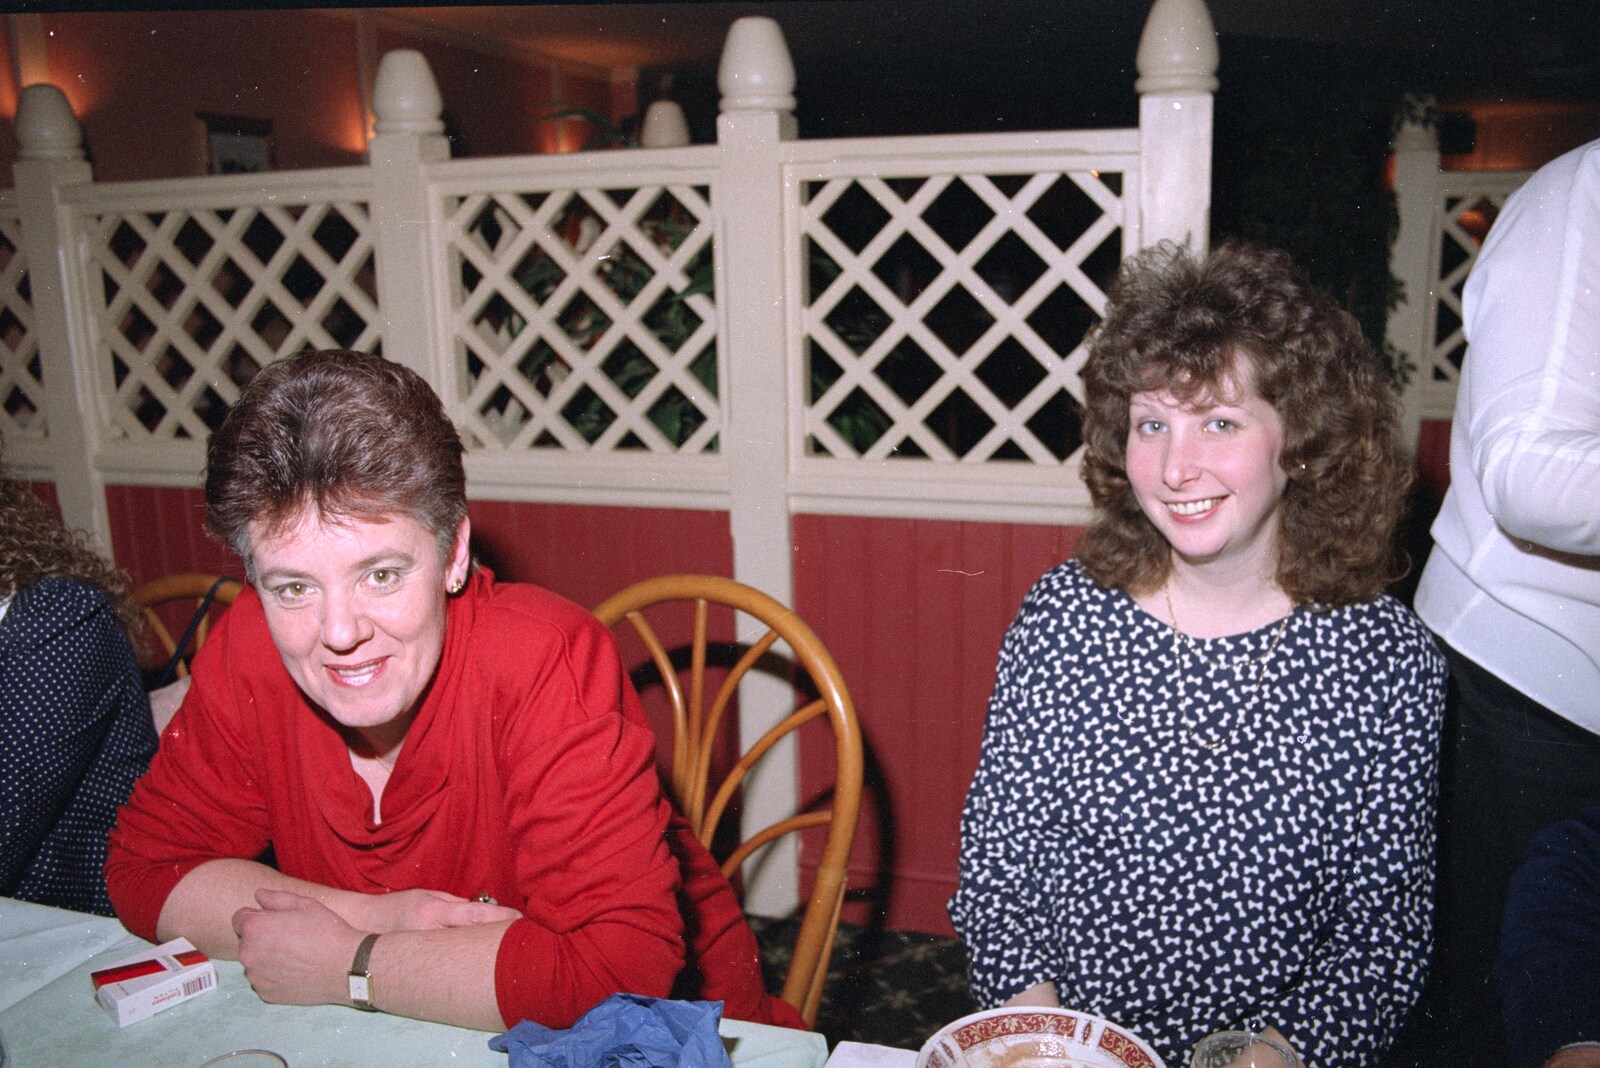 Crispy and Alison from Printec at the Park Hotel, Diss, Norfolk - 14th January 1992